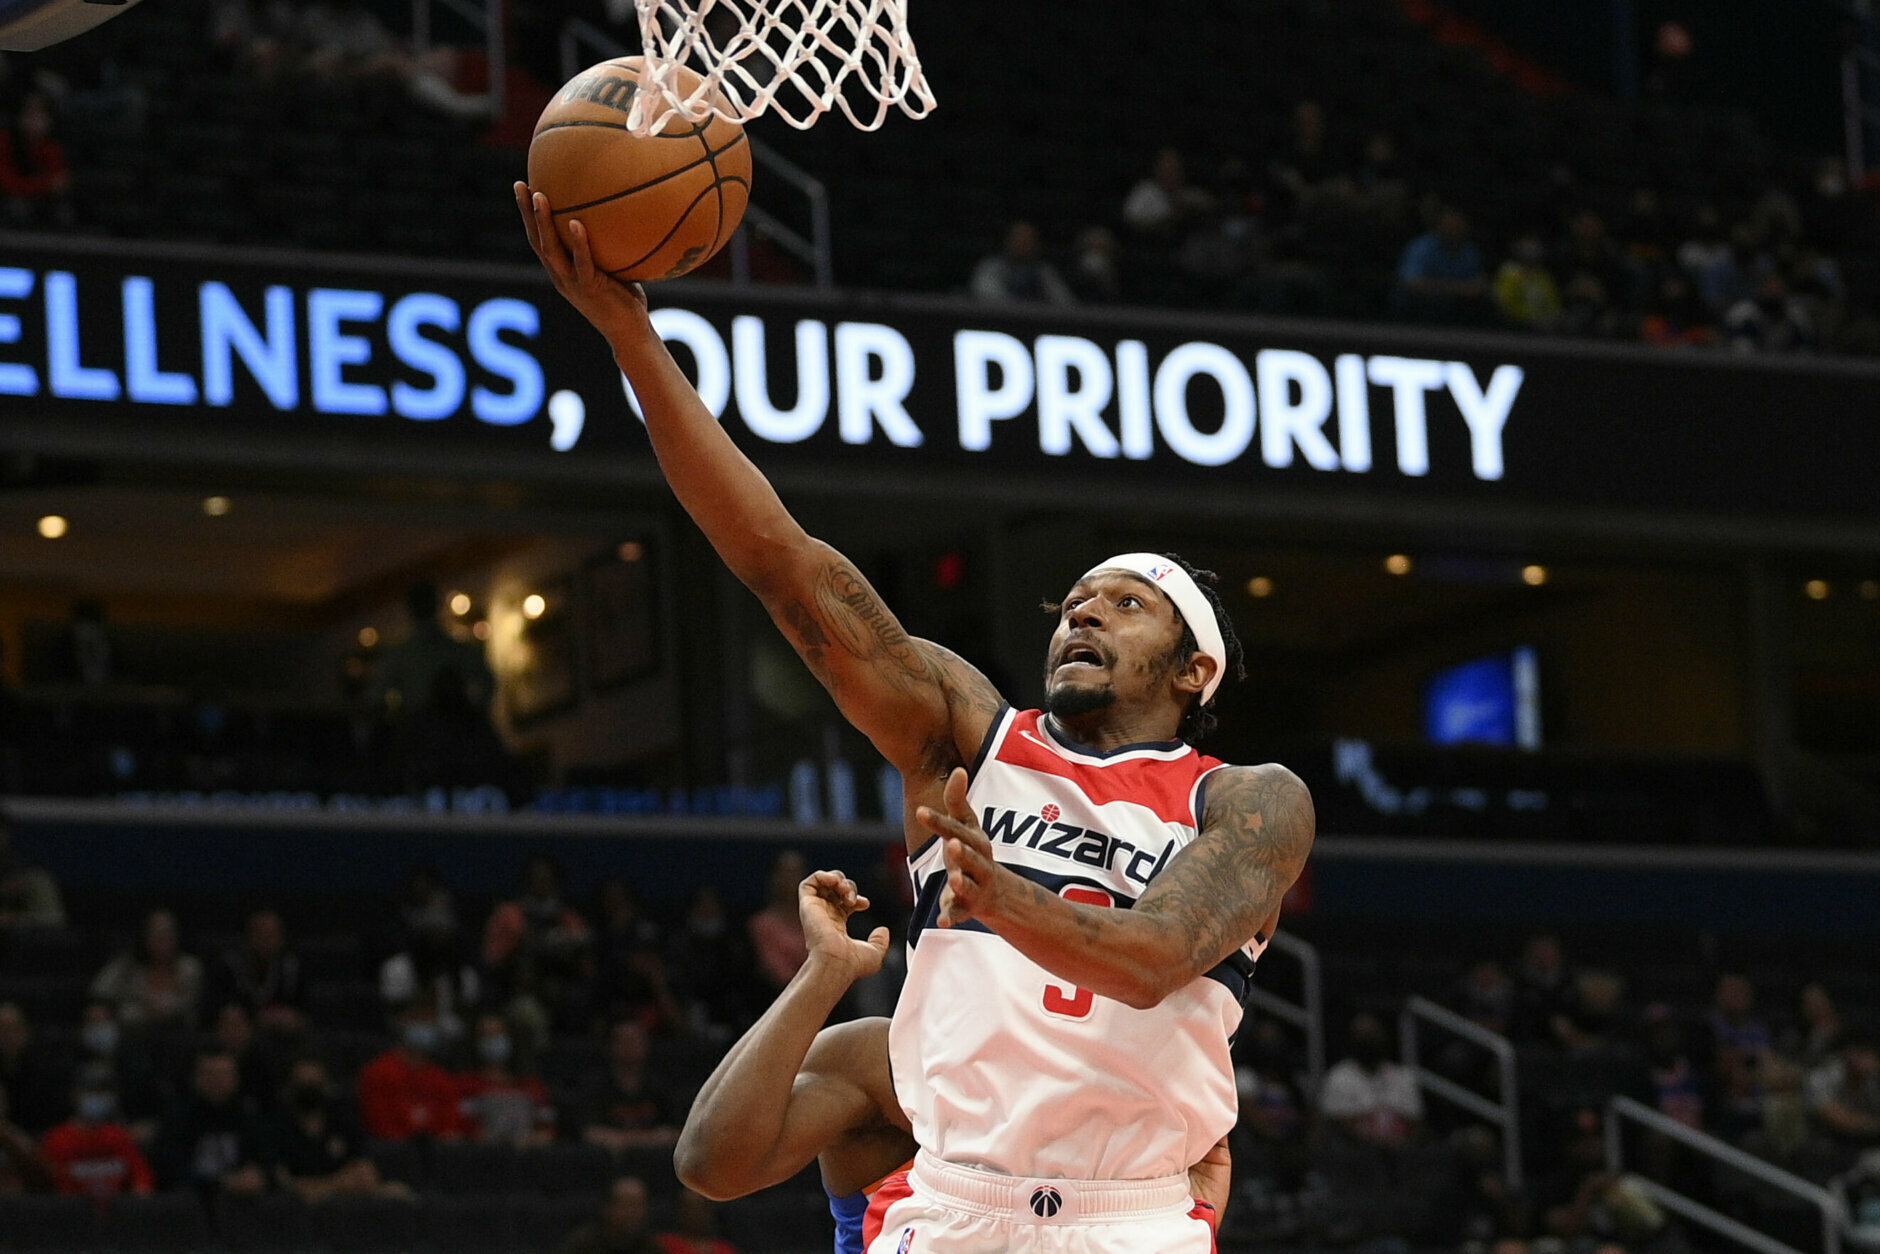 Washington Wizards guard Bradley Beal (3) goes to the basket during the first half of an NBA preseason basketball game against the New York Knicks, Saturday, Oct. 9, 2021, in Washington. (AP Photo/Nick Wass)